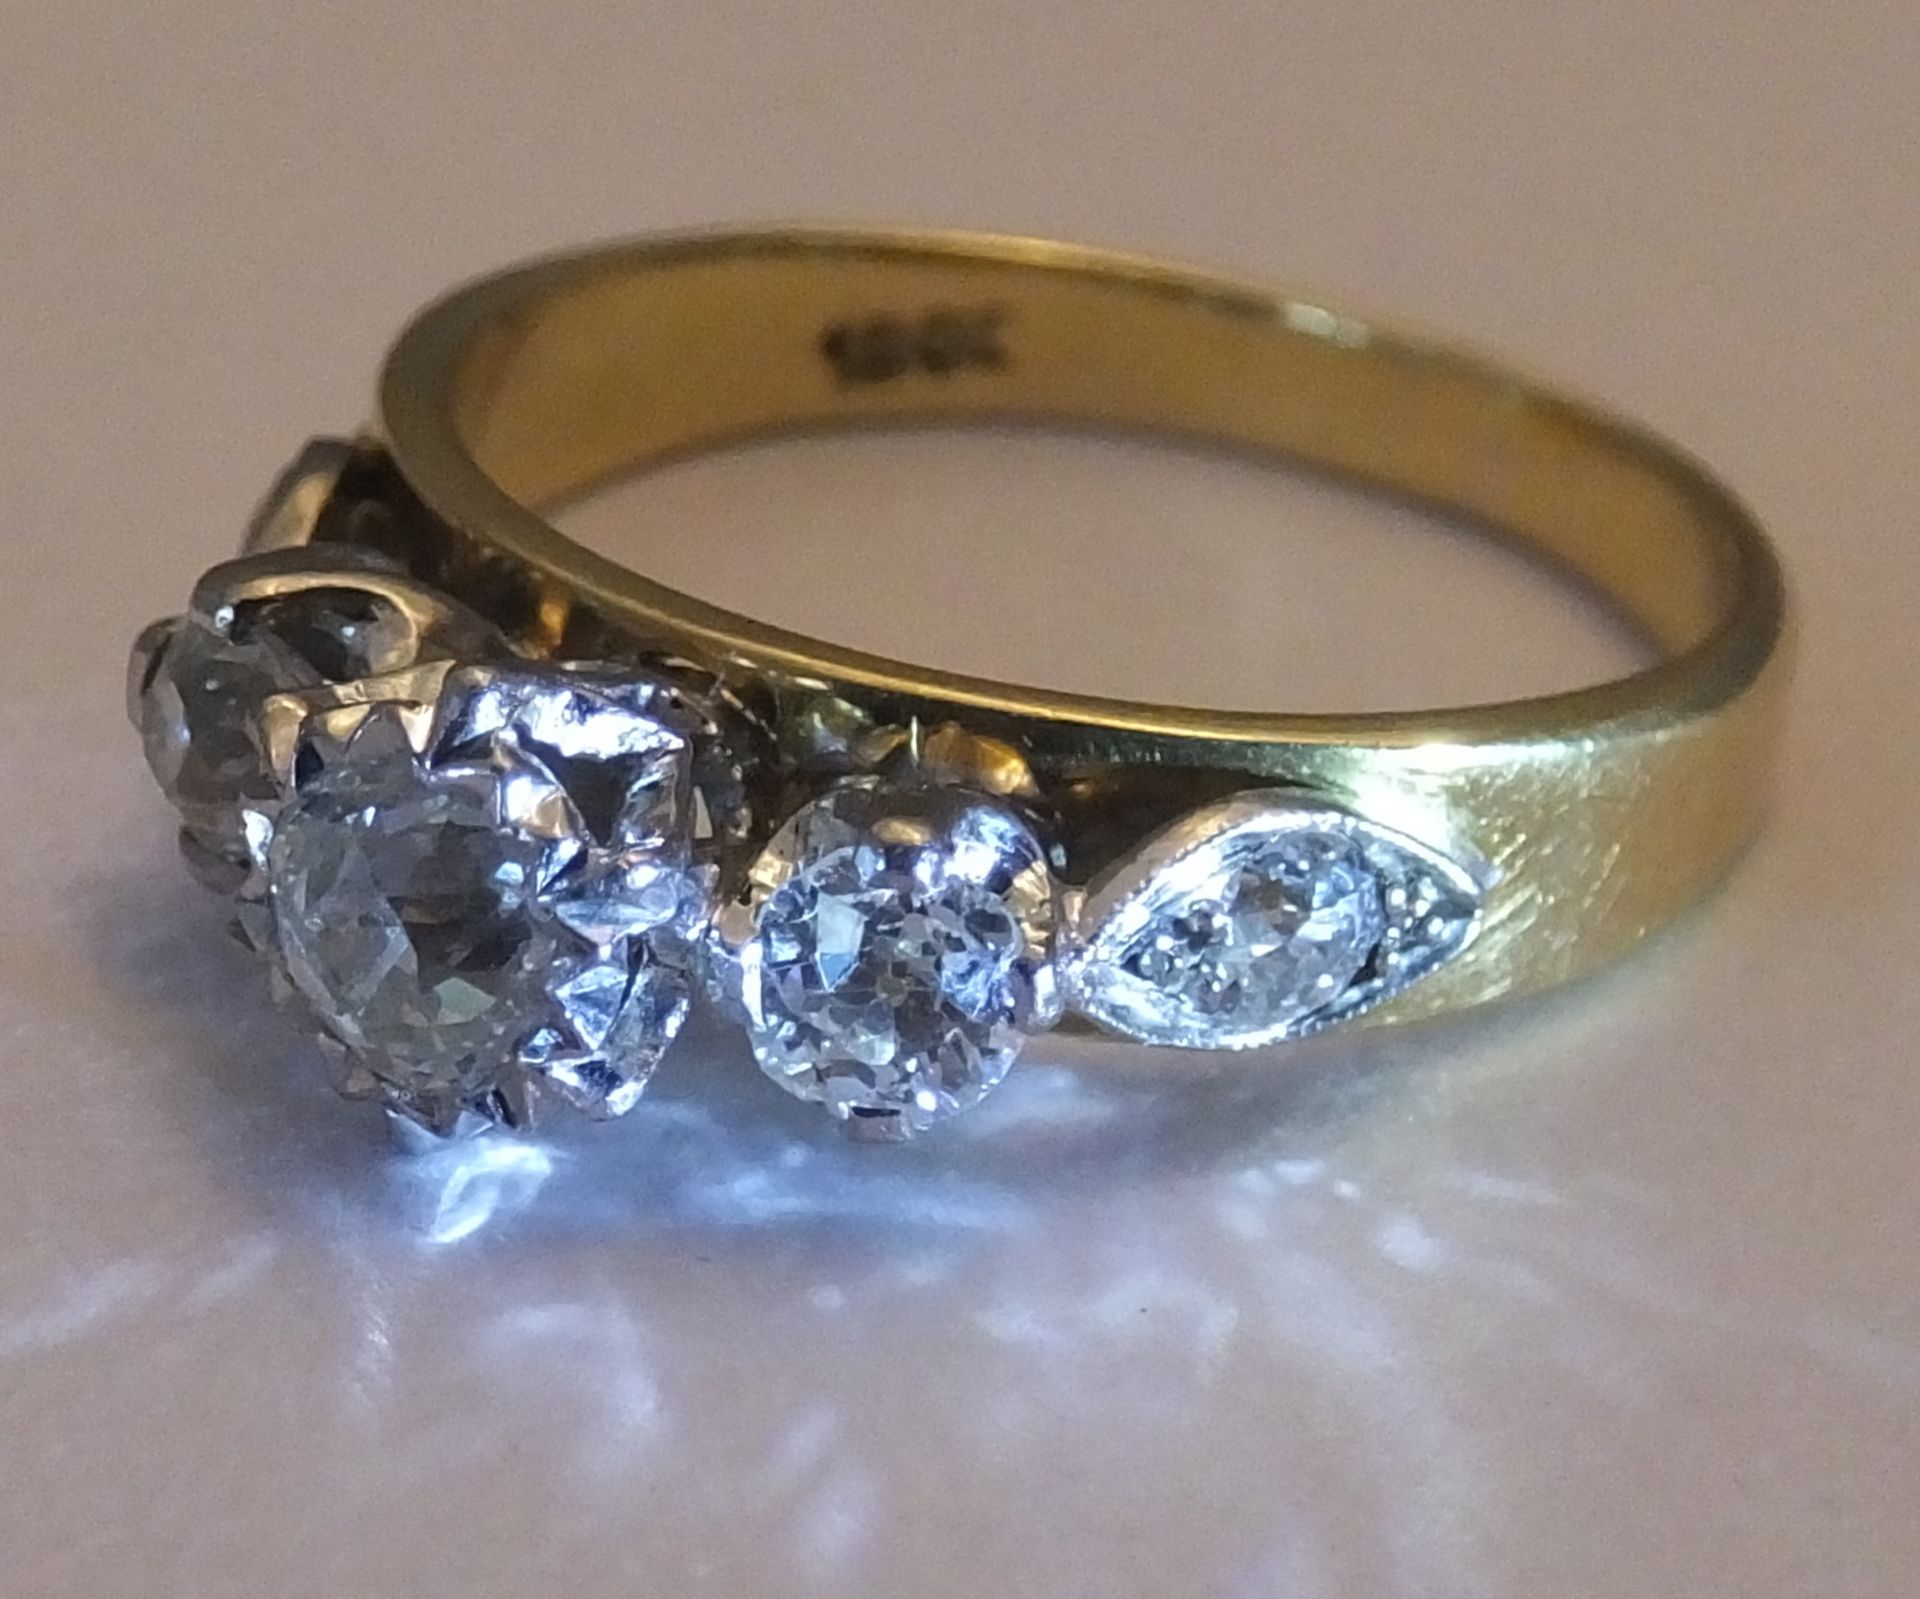 An 18ct Gold 5 stone ring. 1ct of old mine cut diamonds set in 18 carat gold - Image 3 of 3